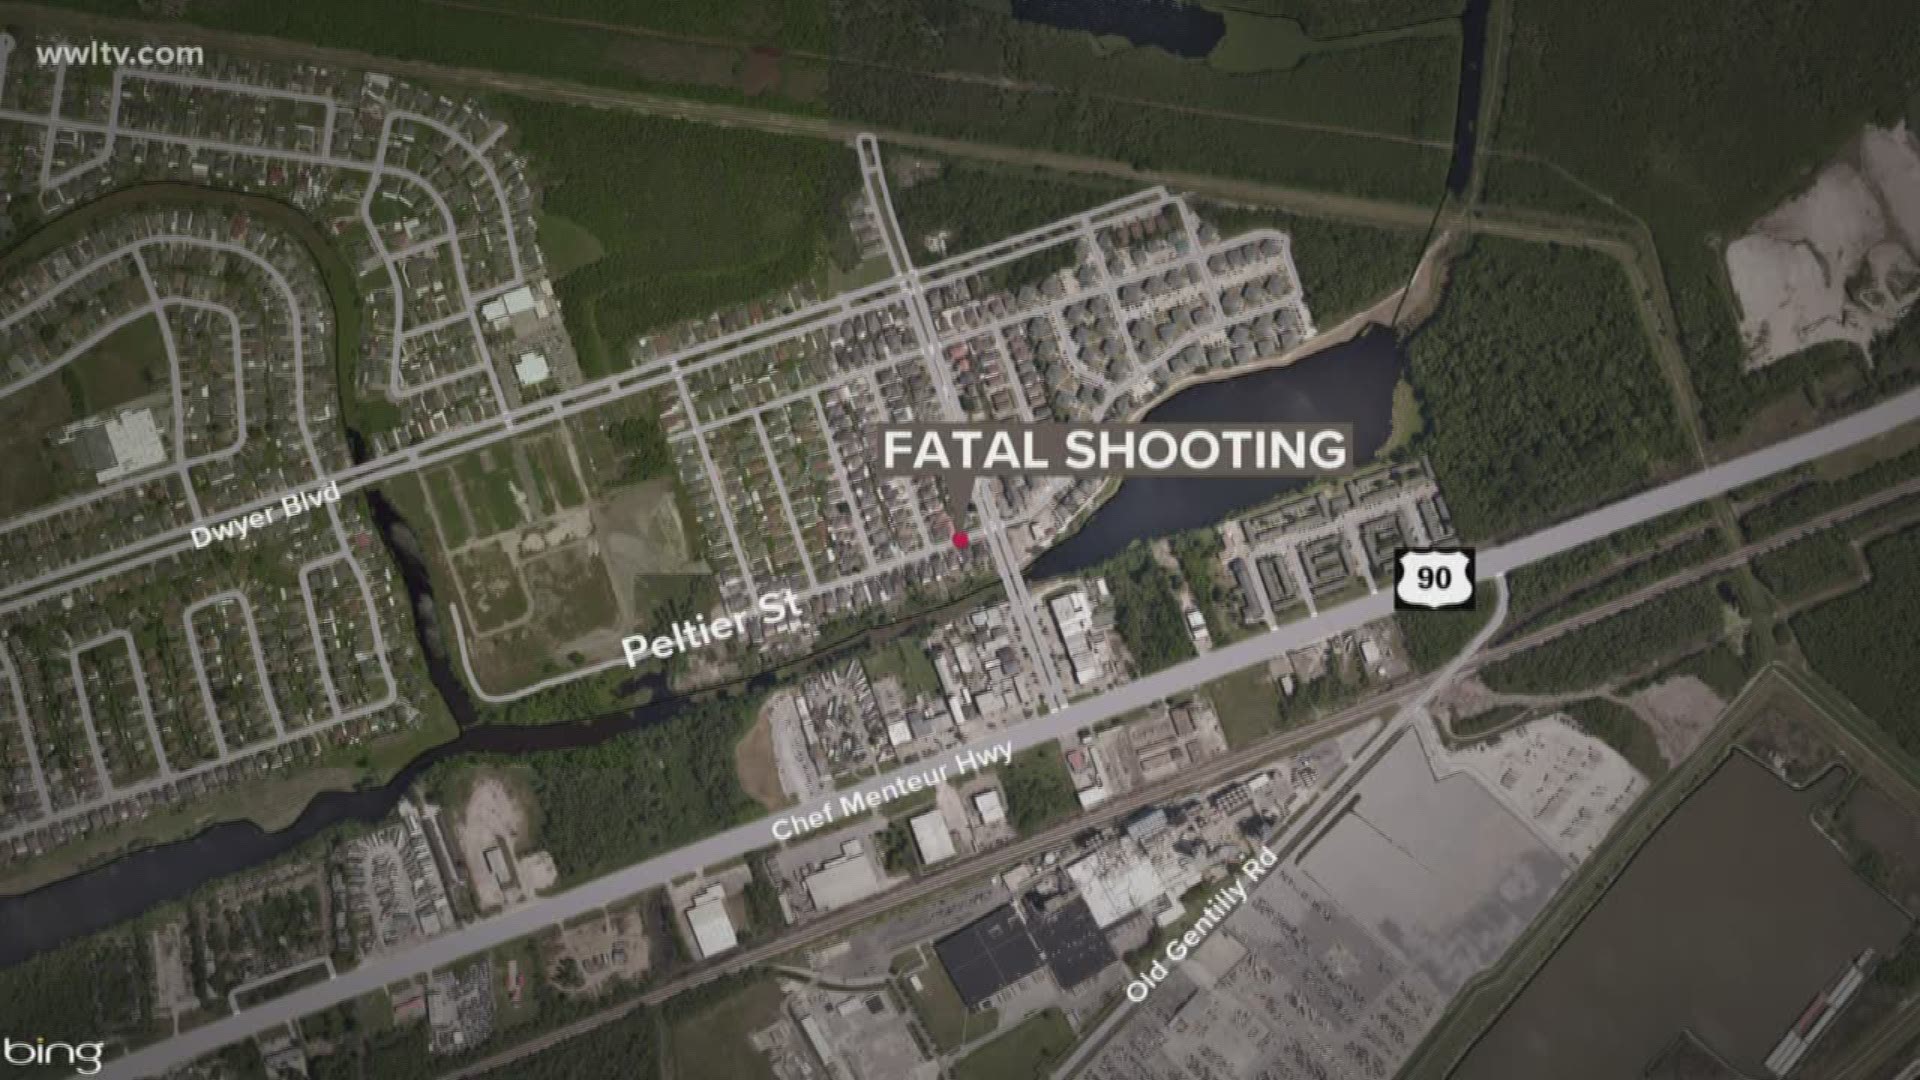 A man was killed Friday night in a shooting in New Orleans East, New Orleans police officials said.